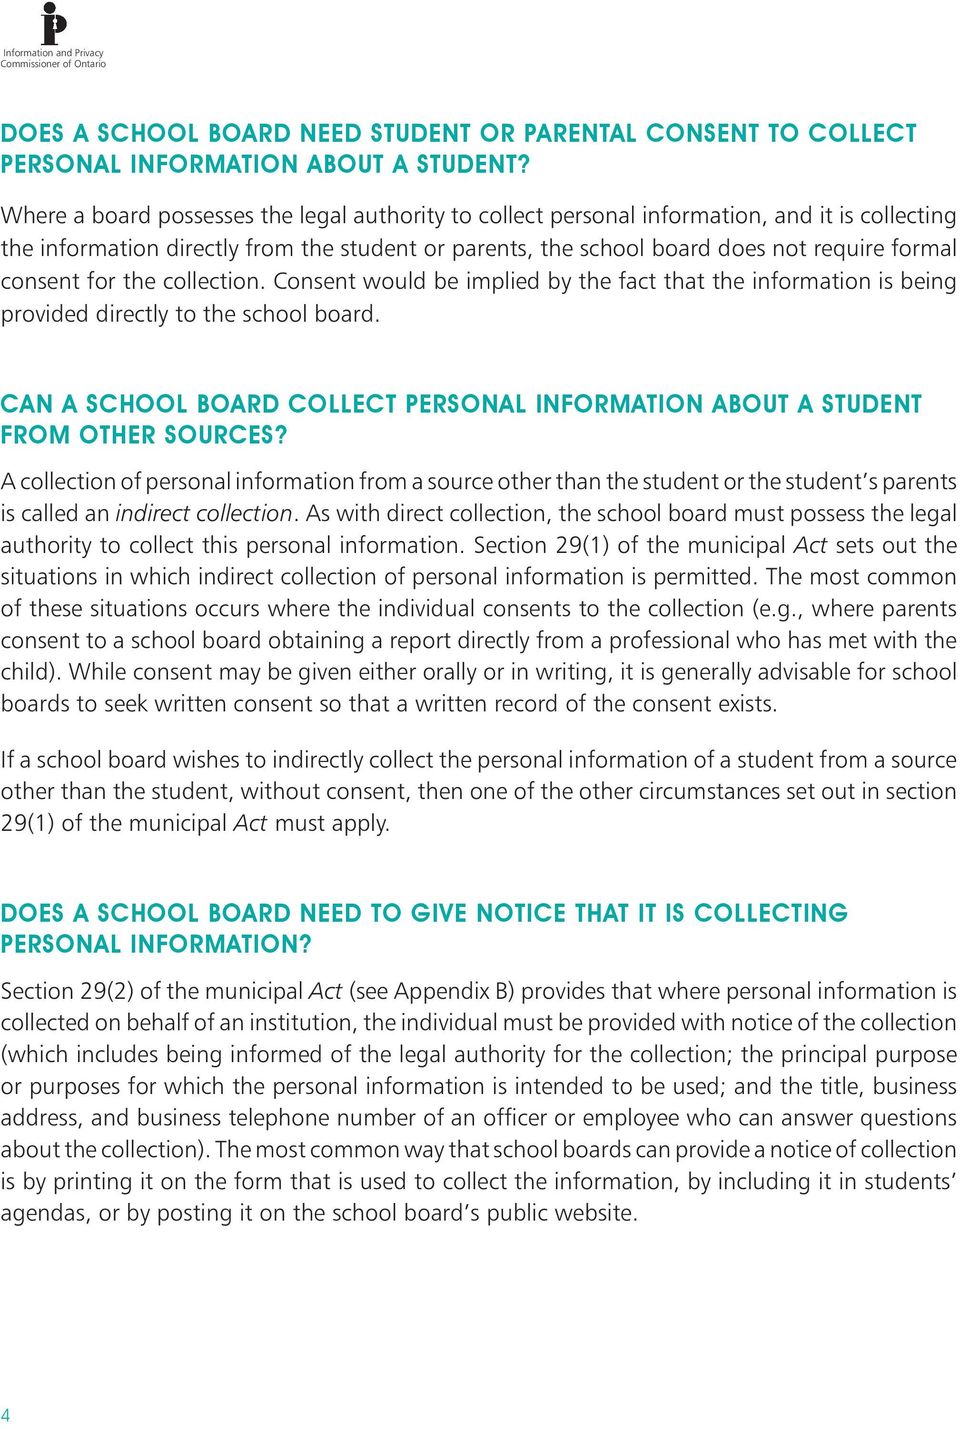 consent for the collection. Consent would be implied by the fact that the information is being provided directly to the school board.